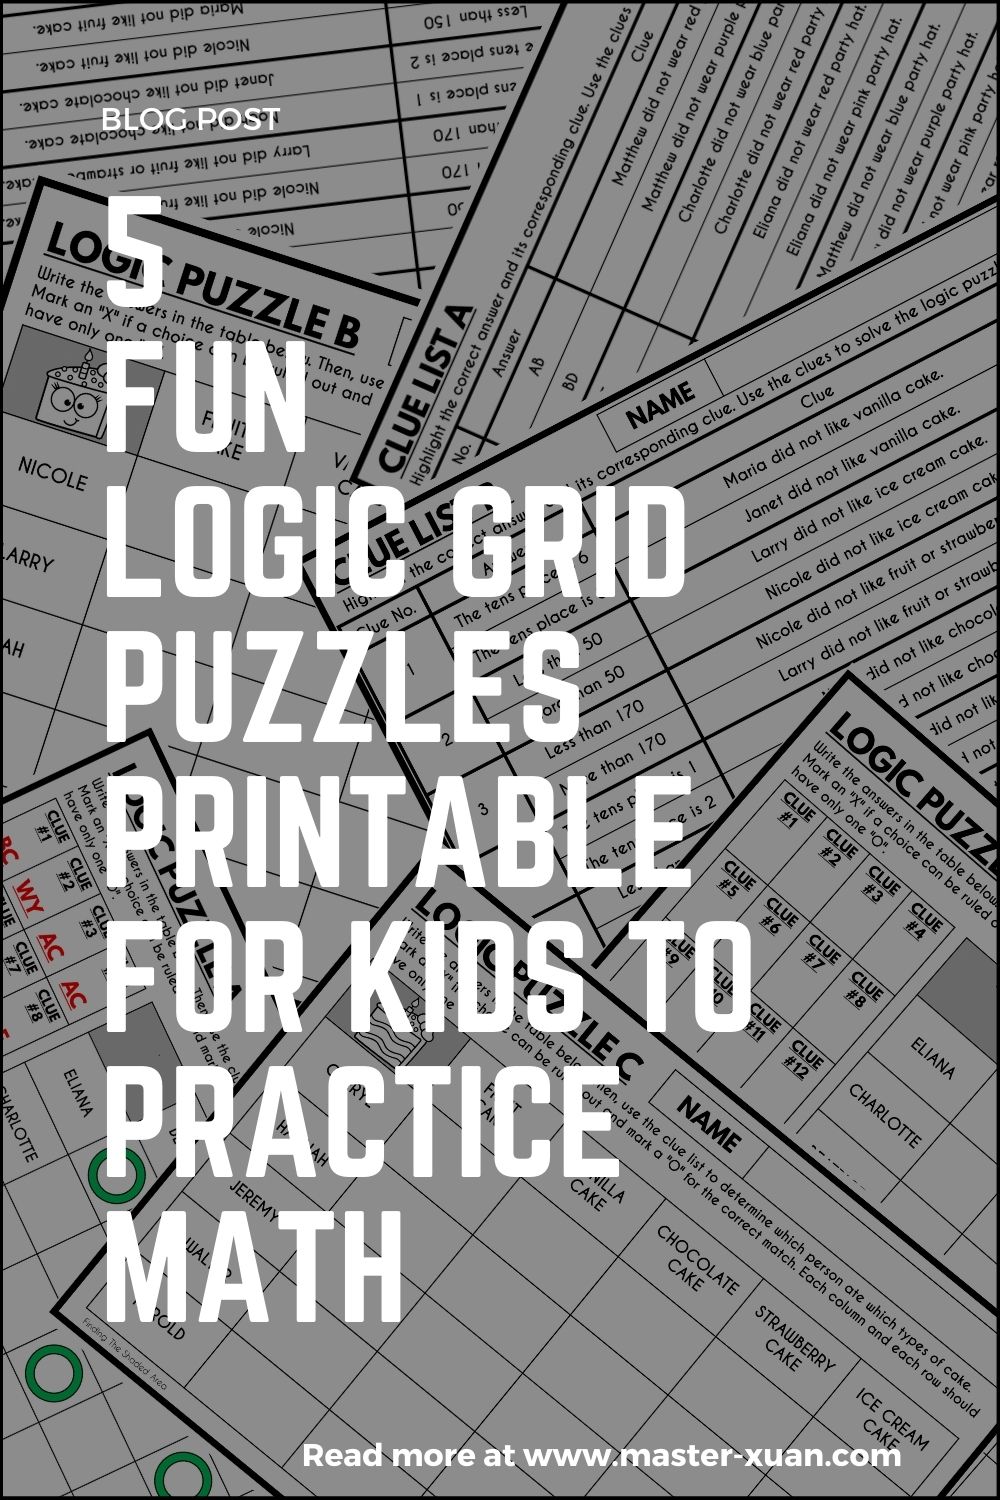 5-fun-logic-grid-puzzles-printable-for-kids-to-practice-math-master-xuan